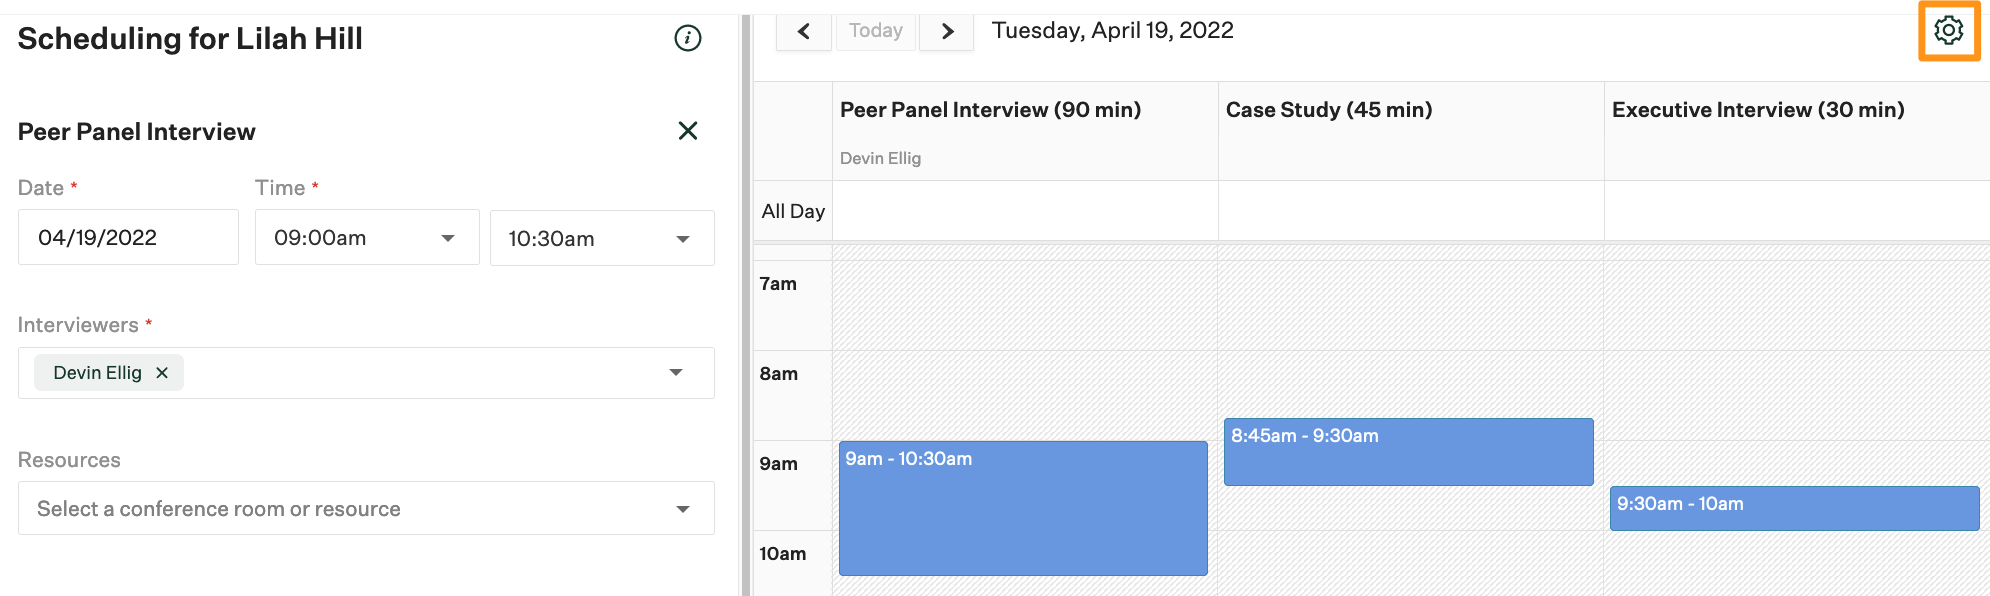 Calendar_settings_gear_icon_selected_on_scheduling_modal.png